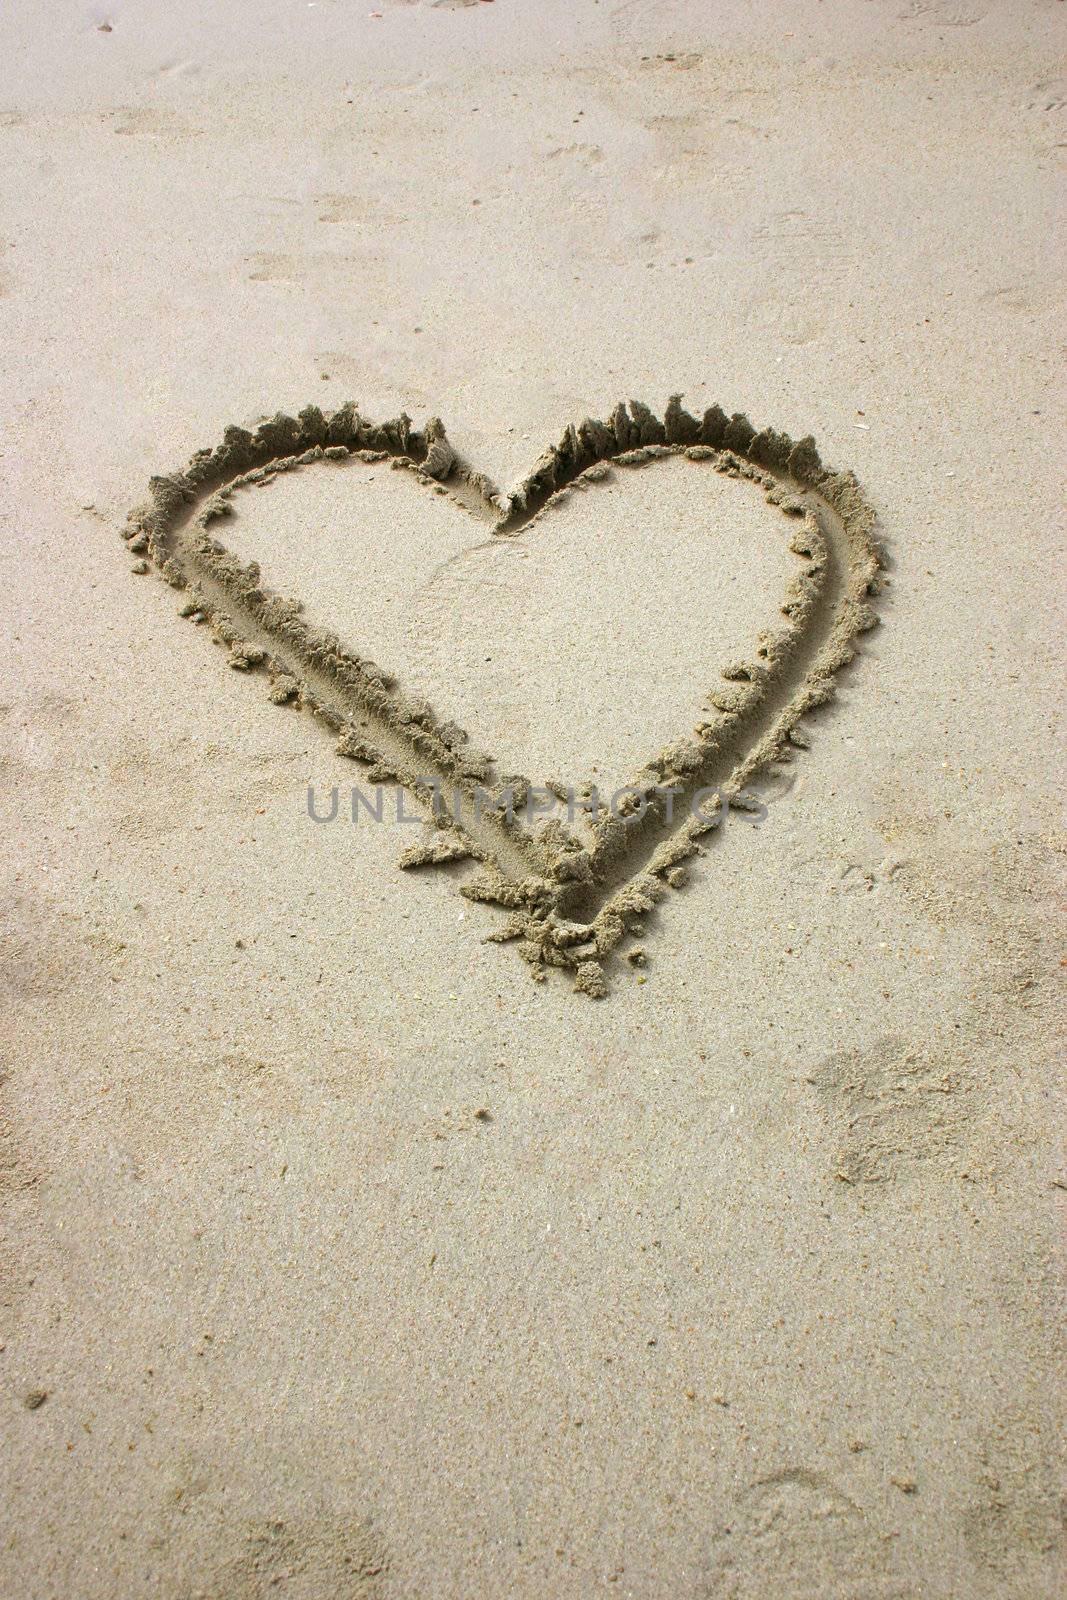 Heart written by hand in sand on the beach